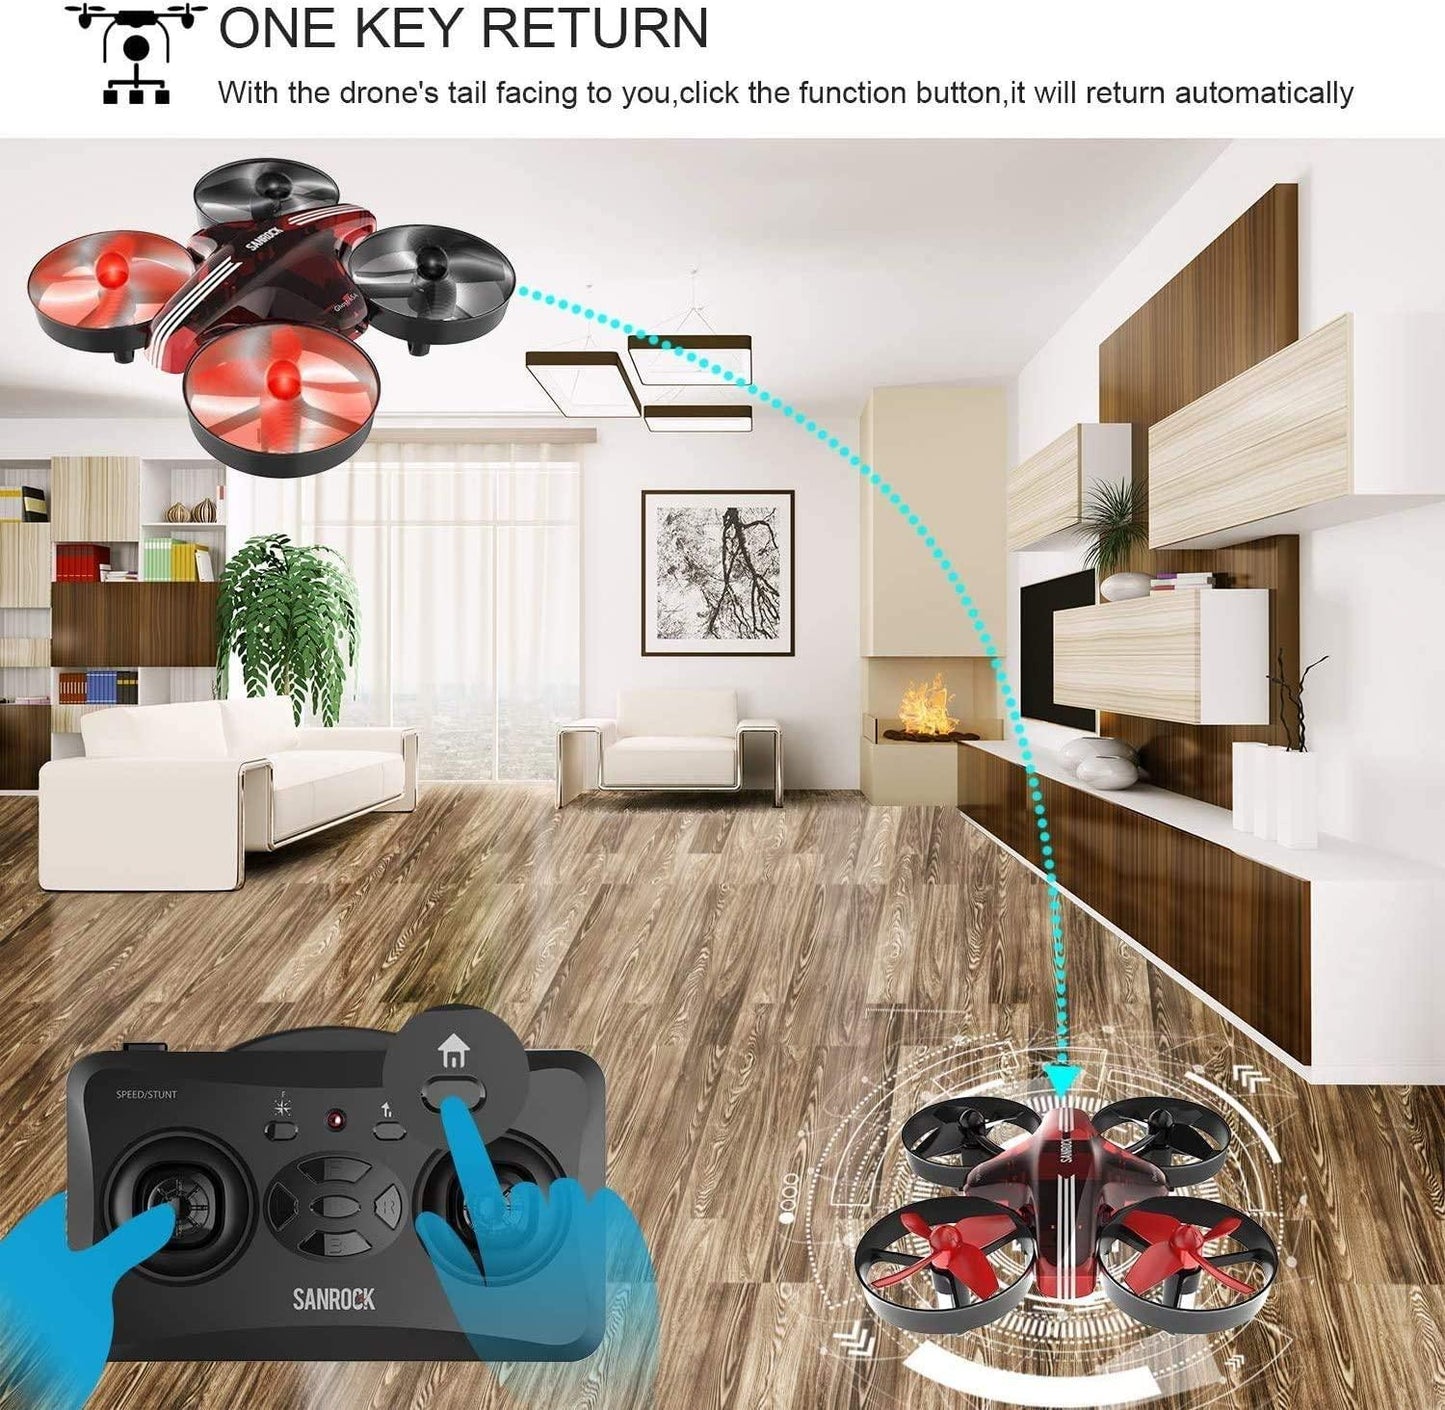 SANROCK GD65A Drone - for Kids and Beginners, RC Helicopter Support Headless Mode, Altitude Hold, 3D Flip, One key return, with 2 Batteries, Great Gift/Toys for Boys and Girls - RCDrone